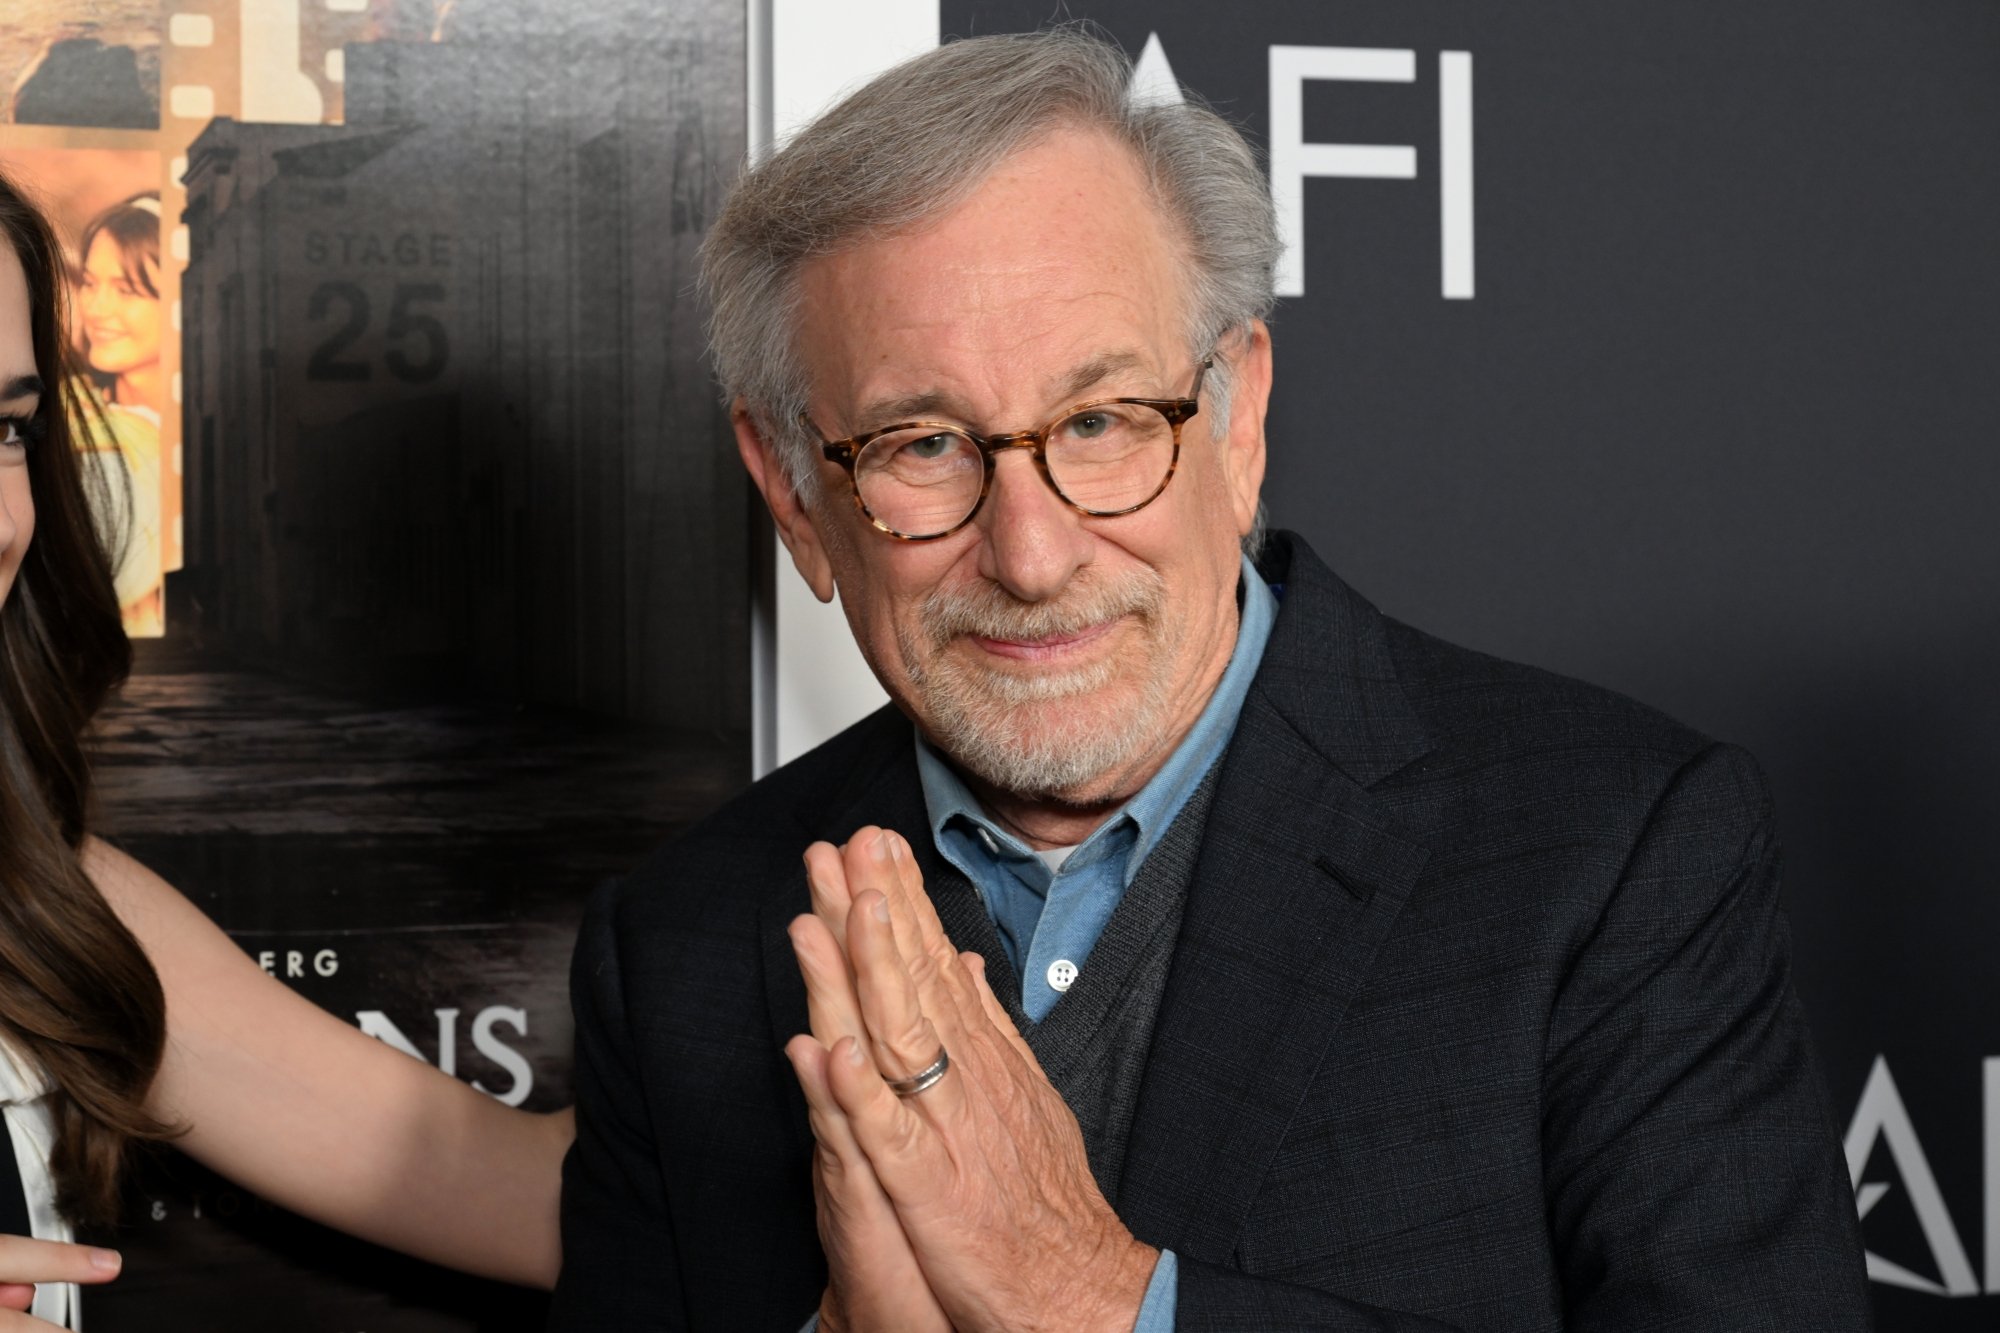 'The Fabelmans' filmmaker Steven Spielberg. He has his hands clasped together, wearing a suit jacket in front of the AFI FEST step-and-repeat